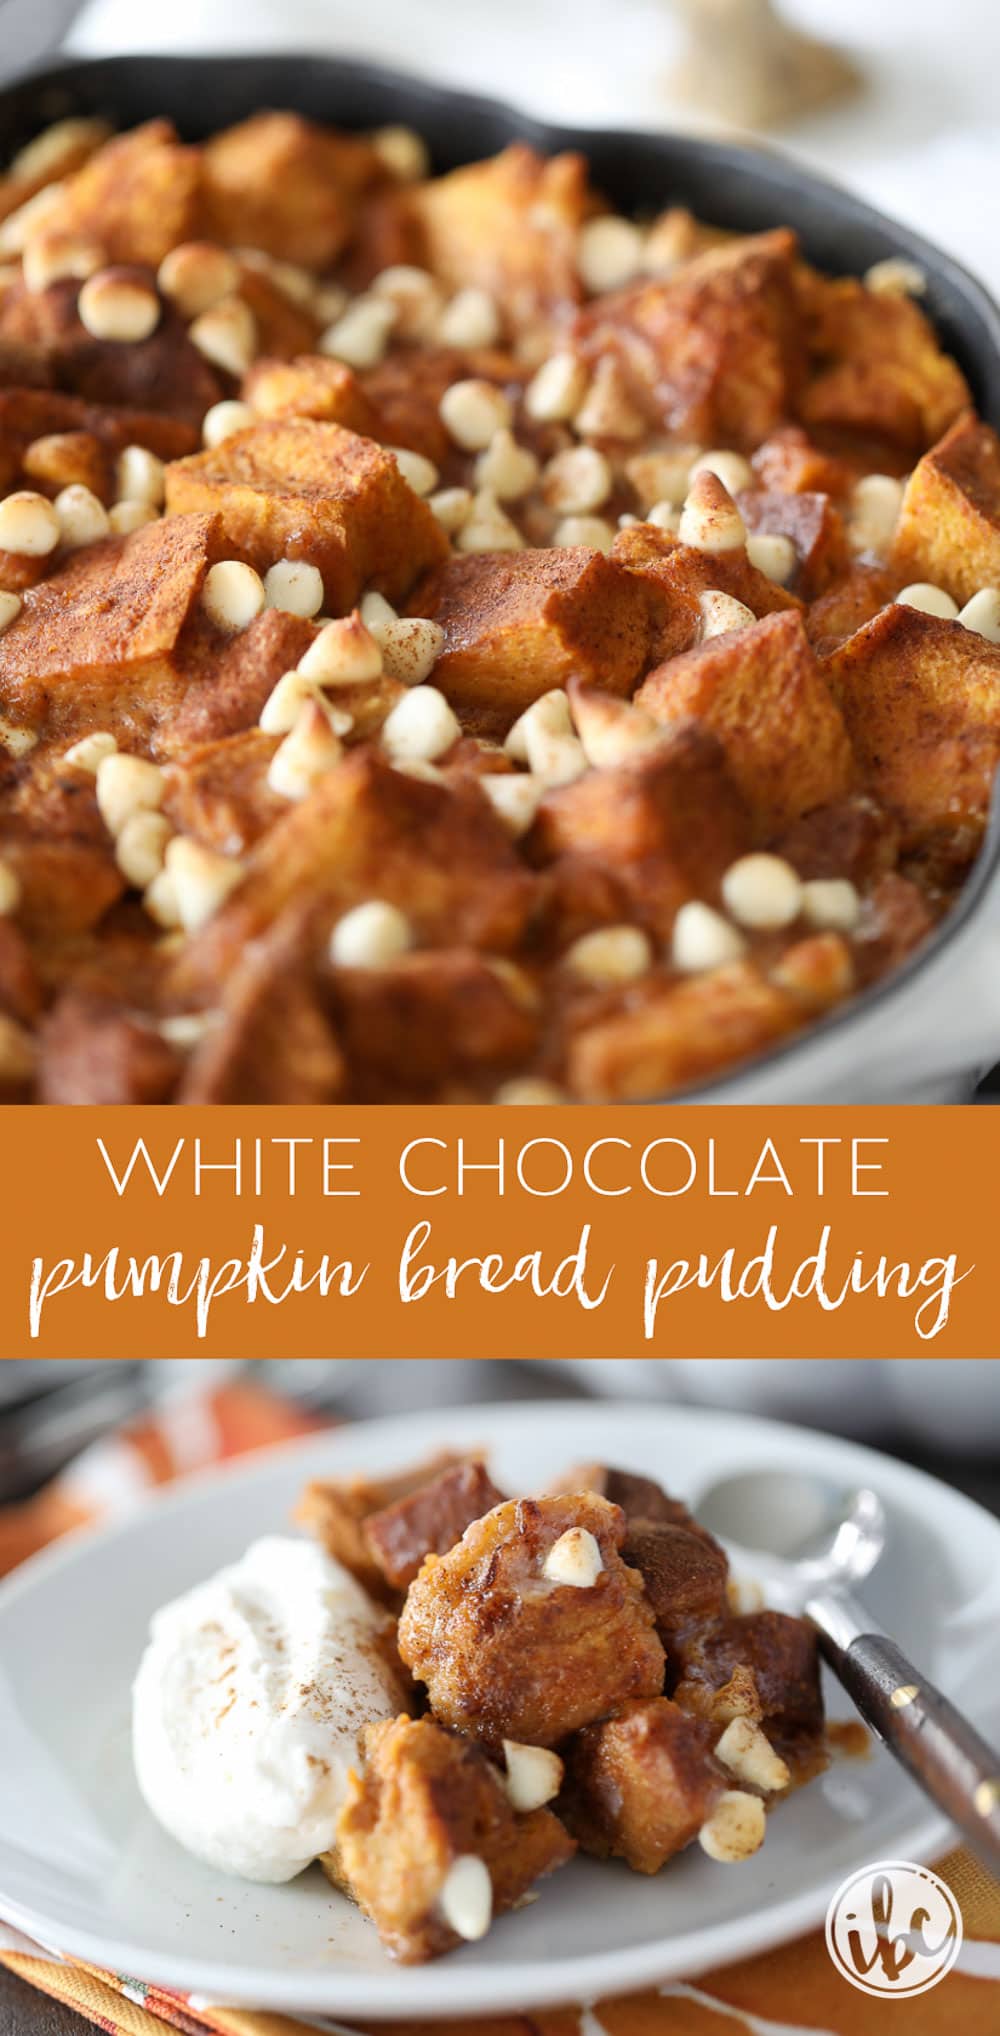 This Pumpkin White Chocolate Bread Pudding made with challah bread and pumpkin custard is the perfect dessert for fall. #pumpkin #pumpkinspice #bread #pudding #fall #baking #recipe